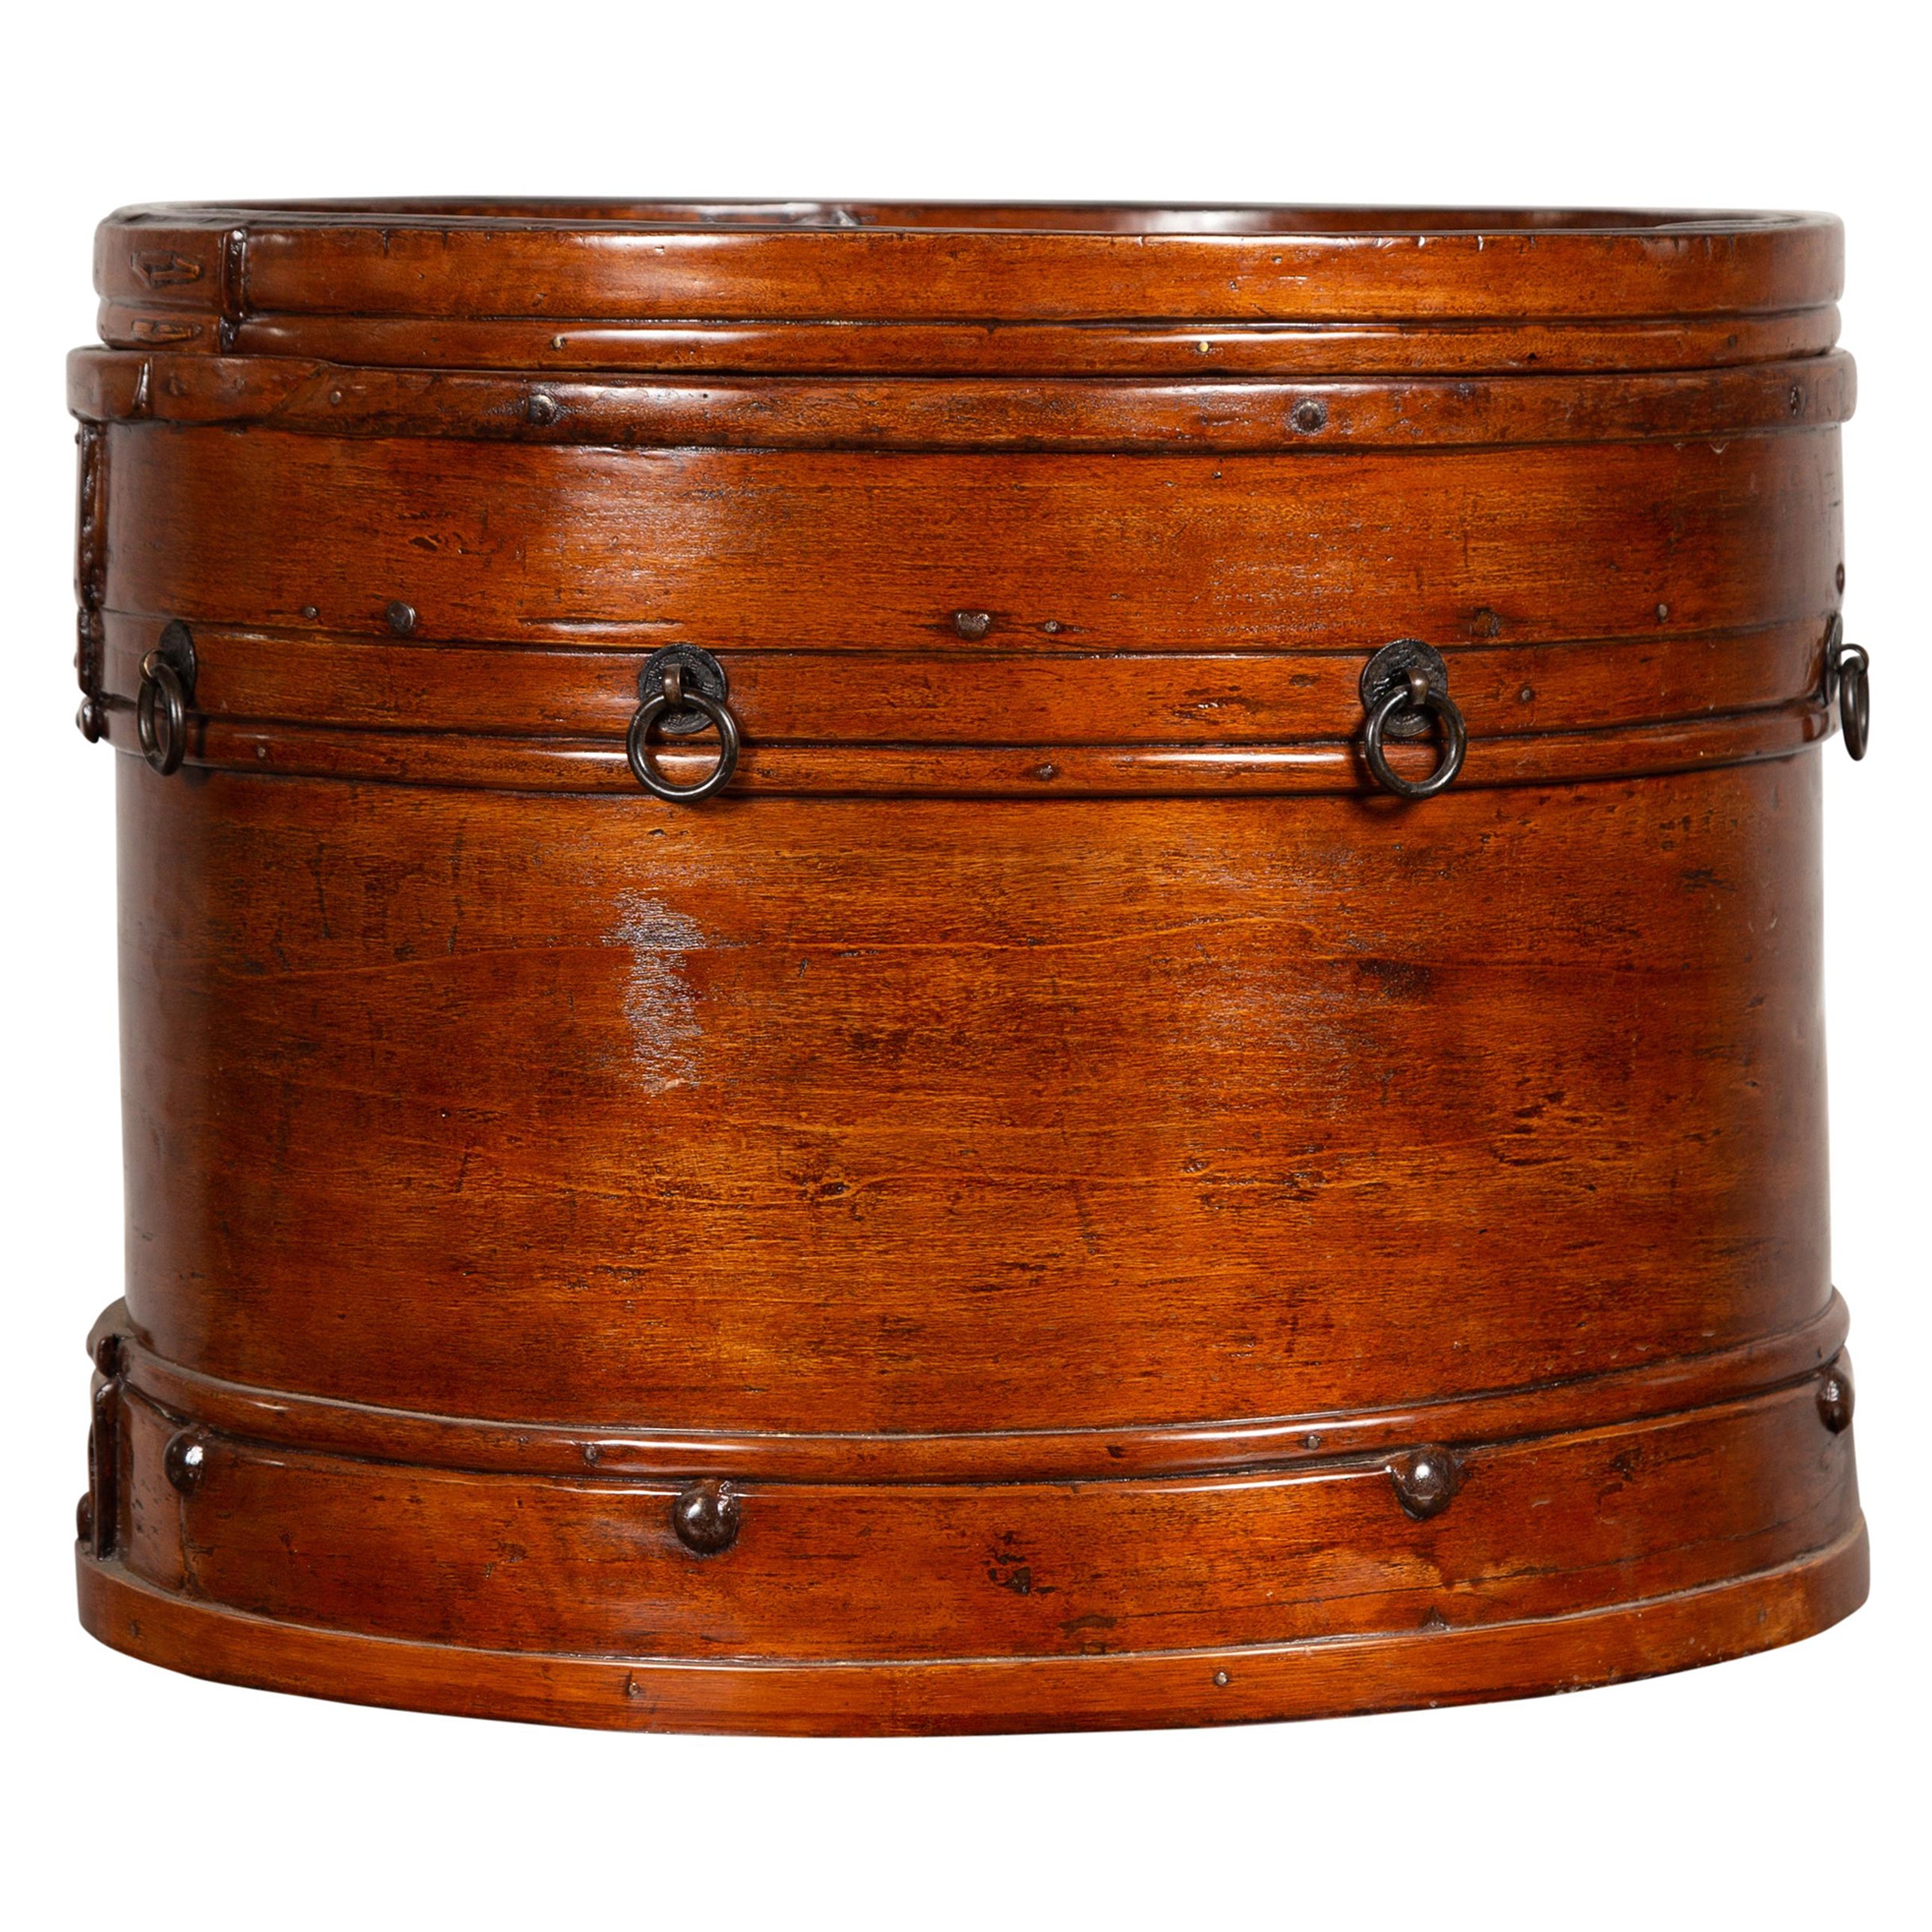 Qing Dynasty 19th Century Round Lidded Wooden Box with Rattan Top